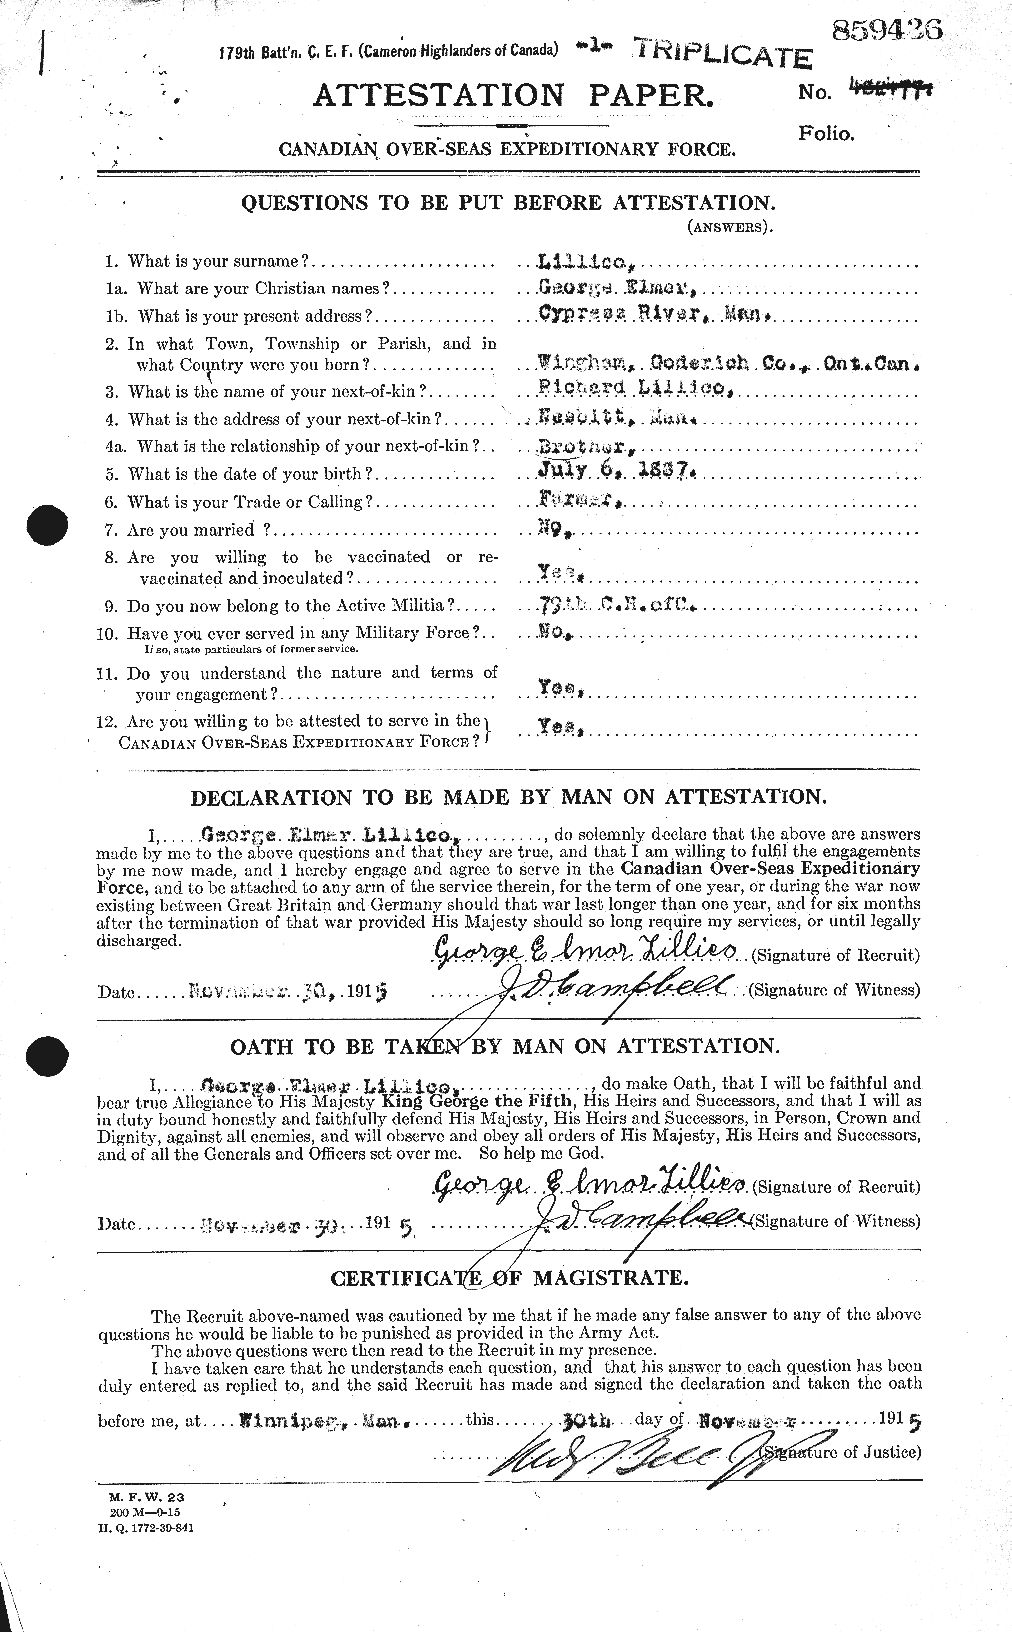 Personnel Records of the First World War - CEF 467455a